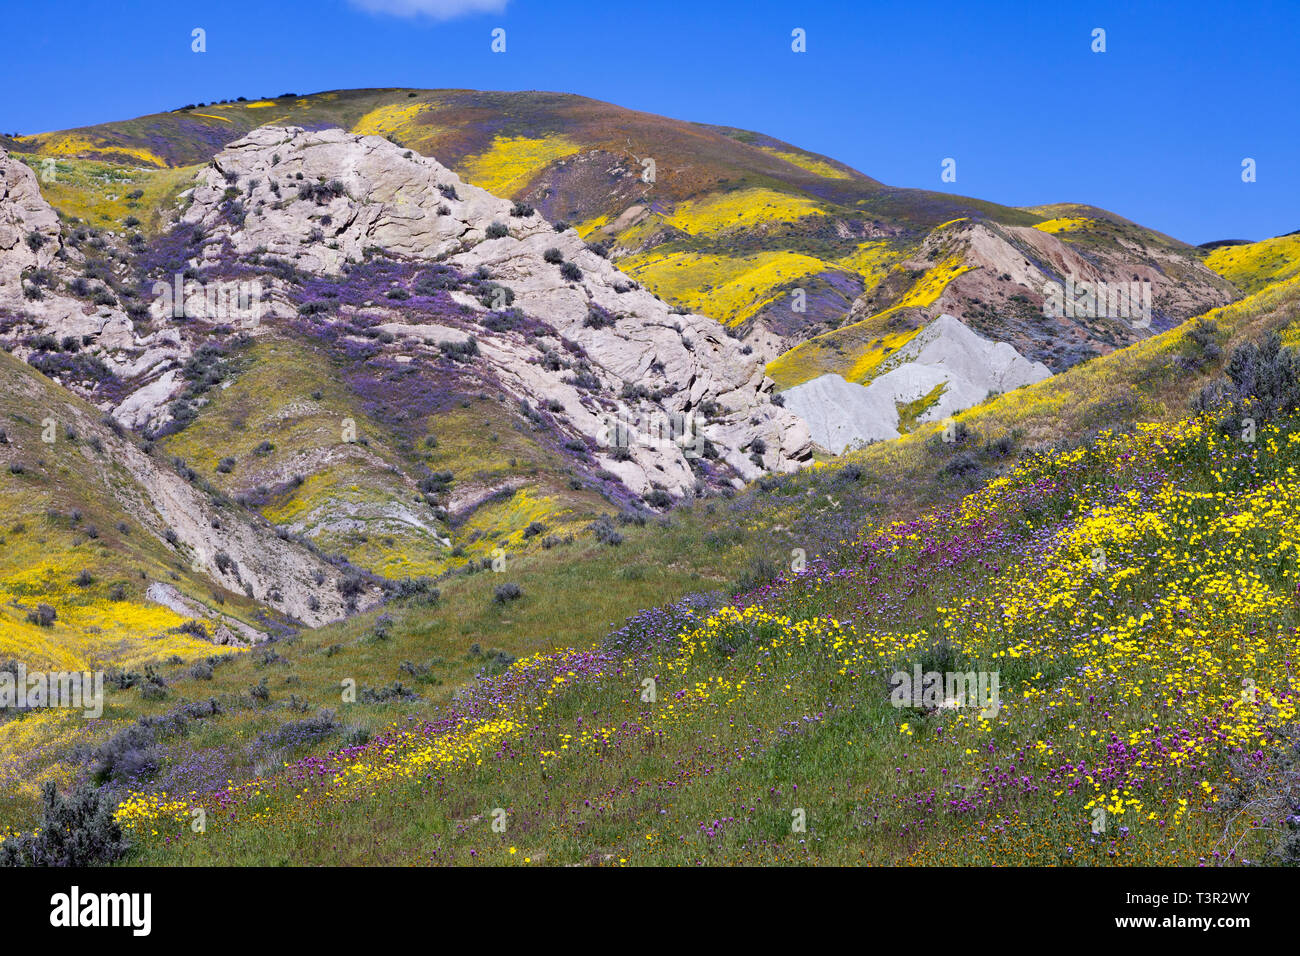 Wildflowers bloom along the temblor range at the Carrizo Plain National Monument. Stock Photo